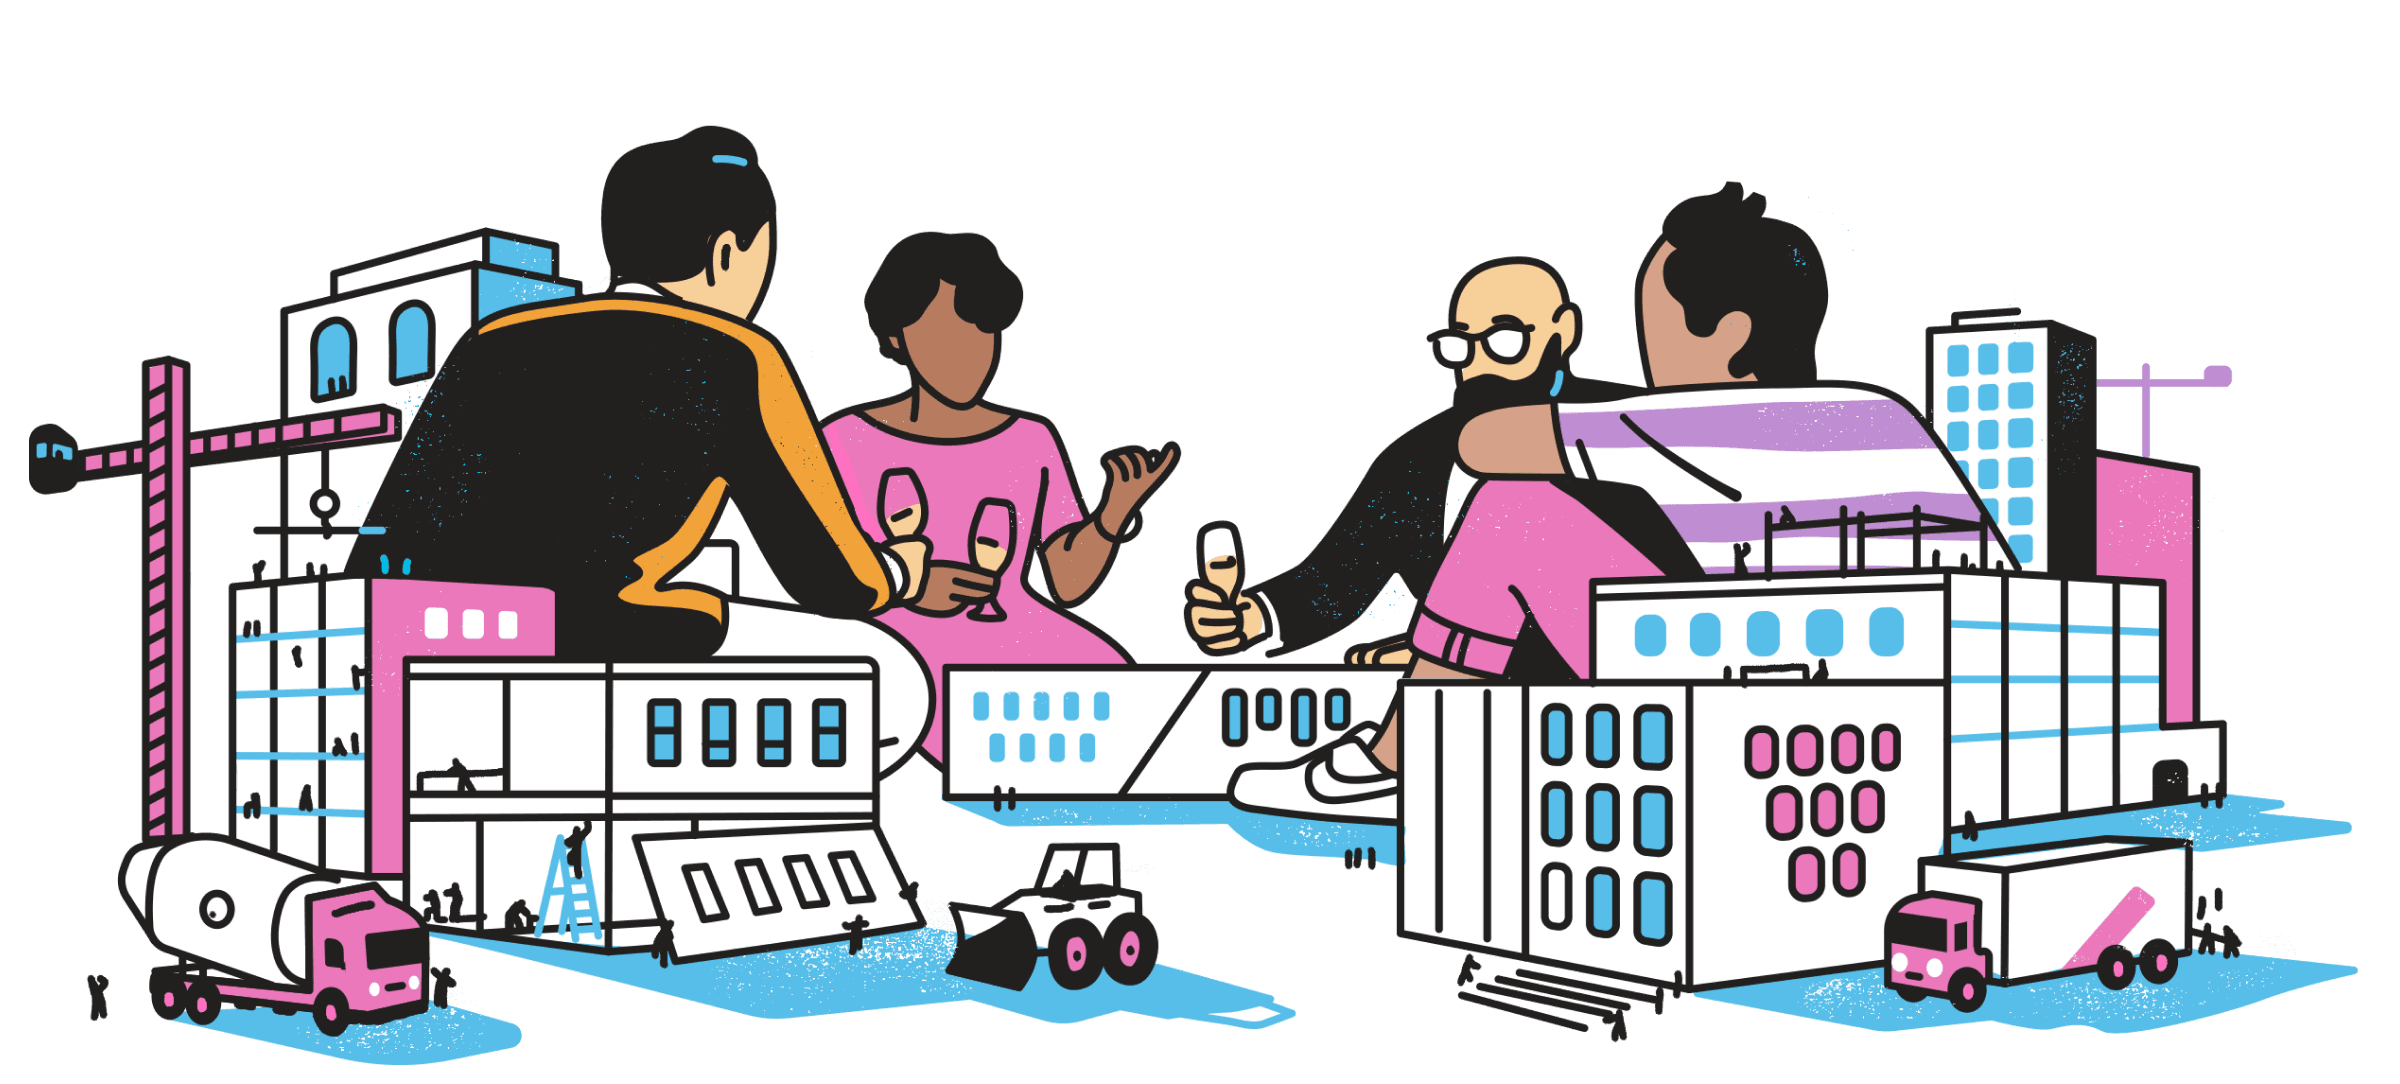 A vibrant illustration of four people engaged in a discussion in an urban setting with buildings under construction and various vehicles around them.